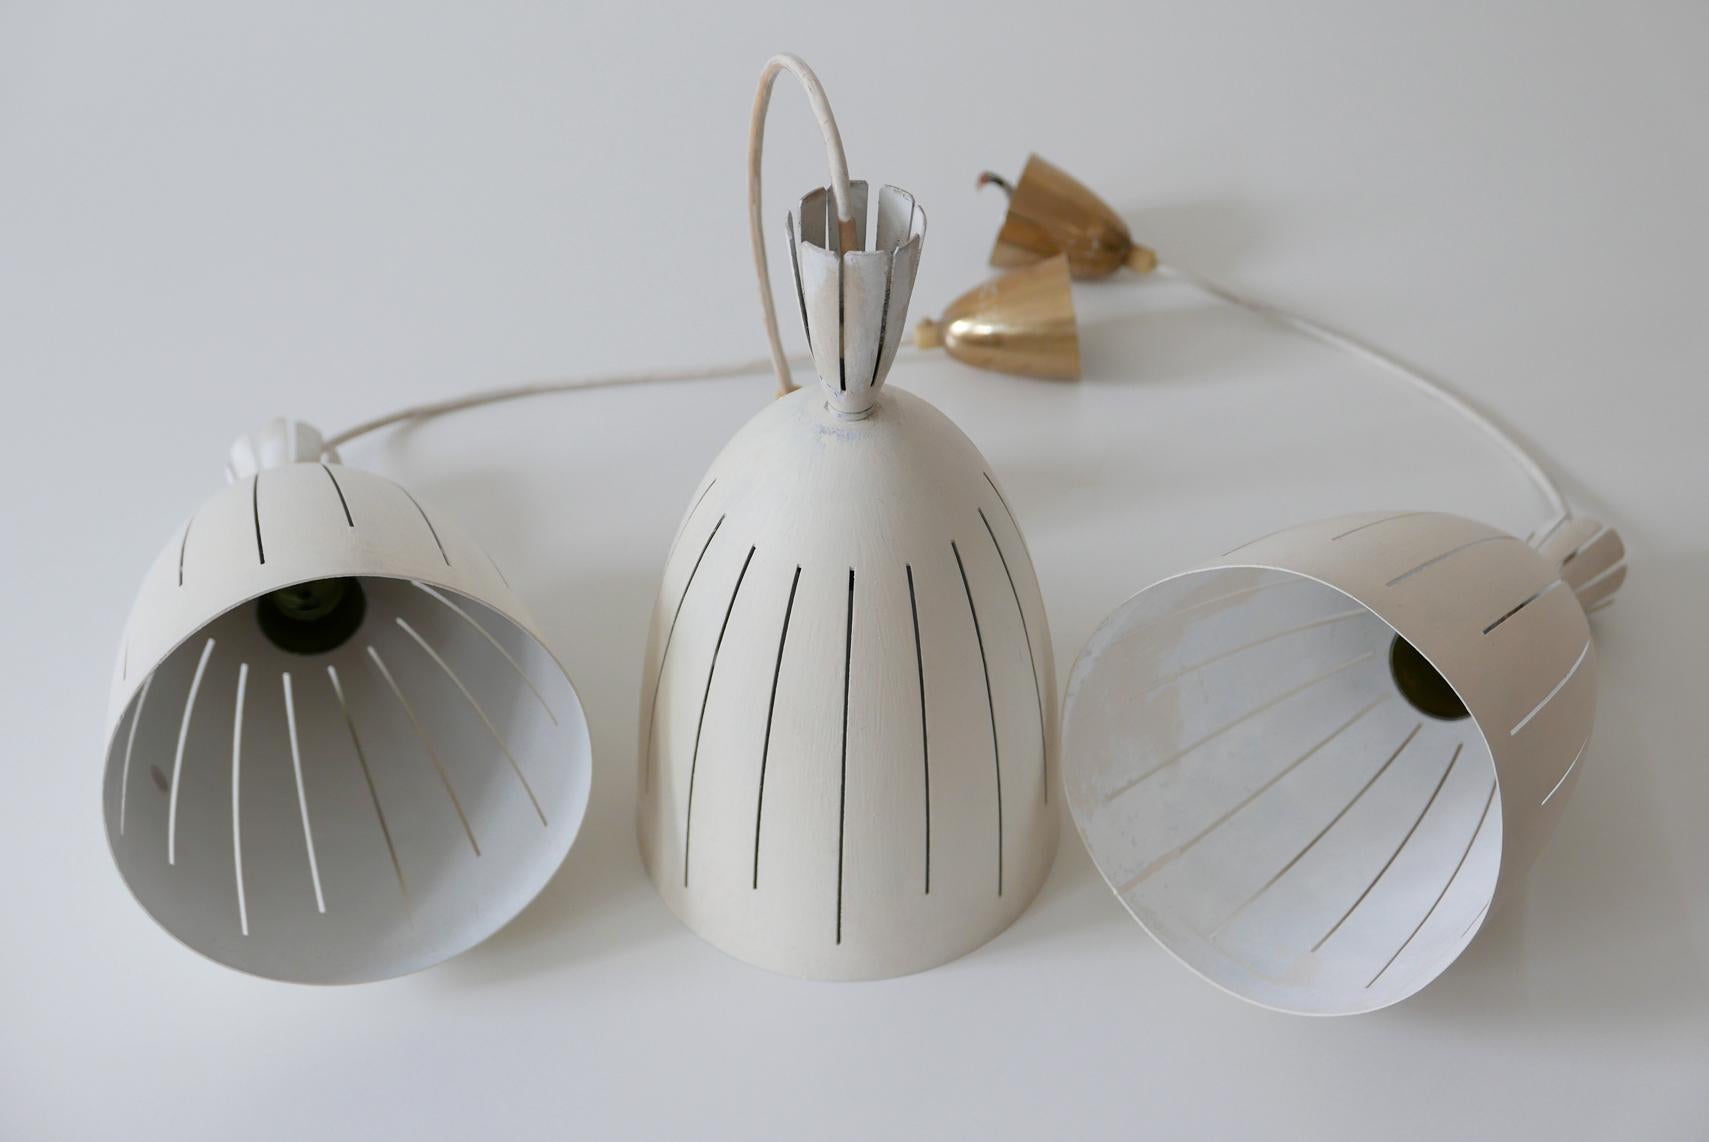 Set of Three Lovely Mid-Century Modern Diabolo Pendant Lamps, 1950s, Germany For Sale 14